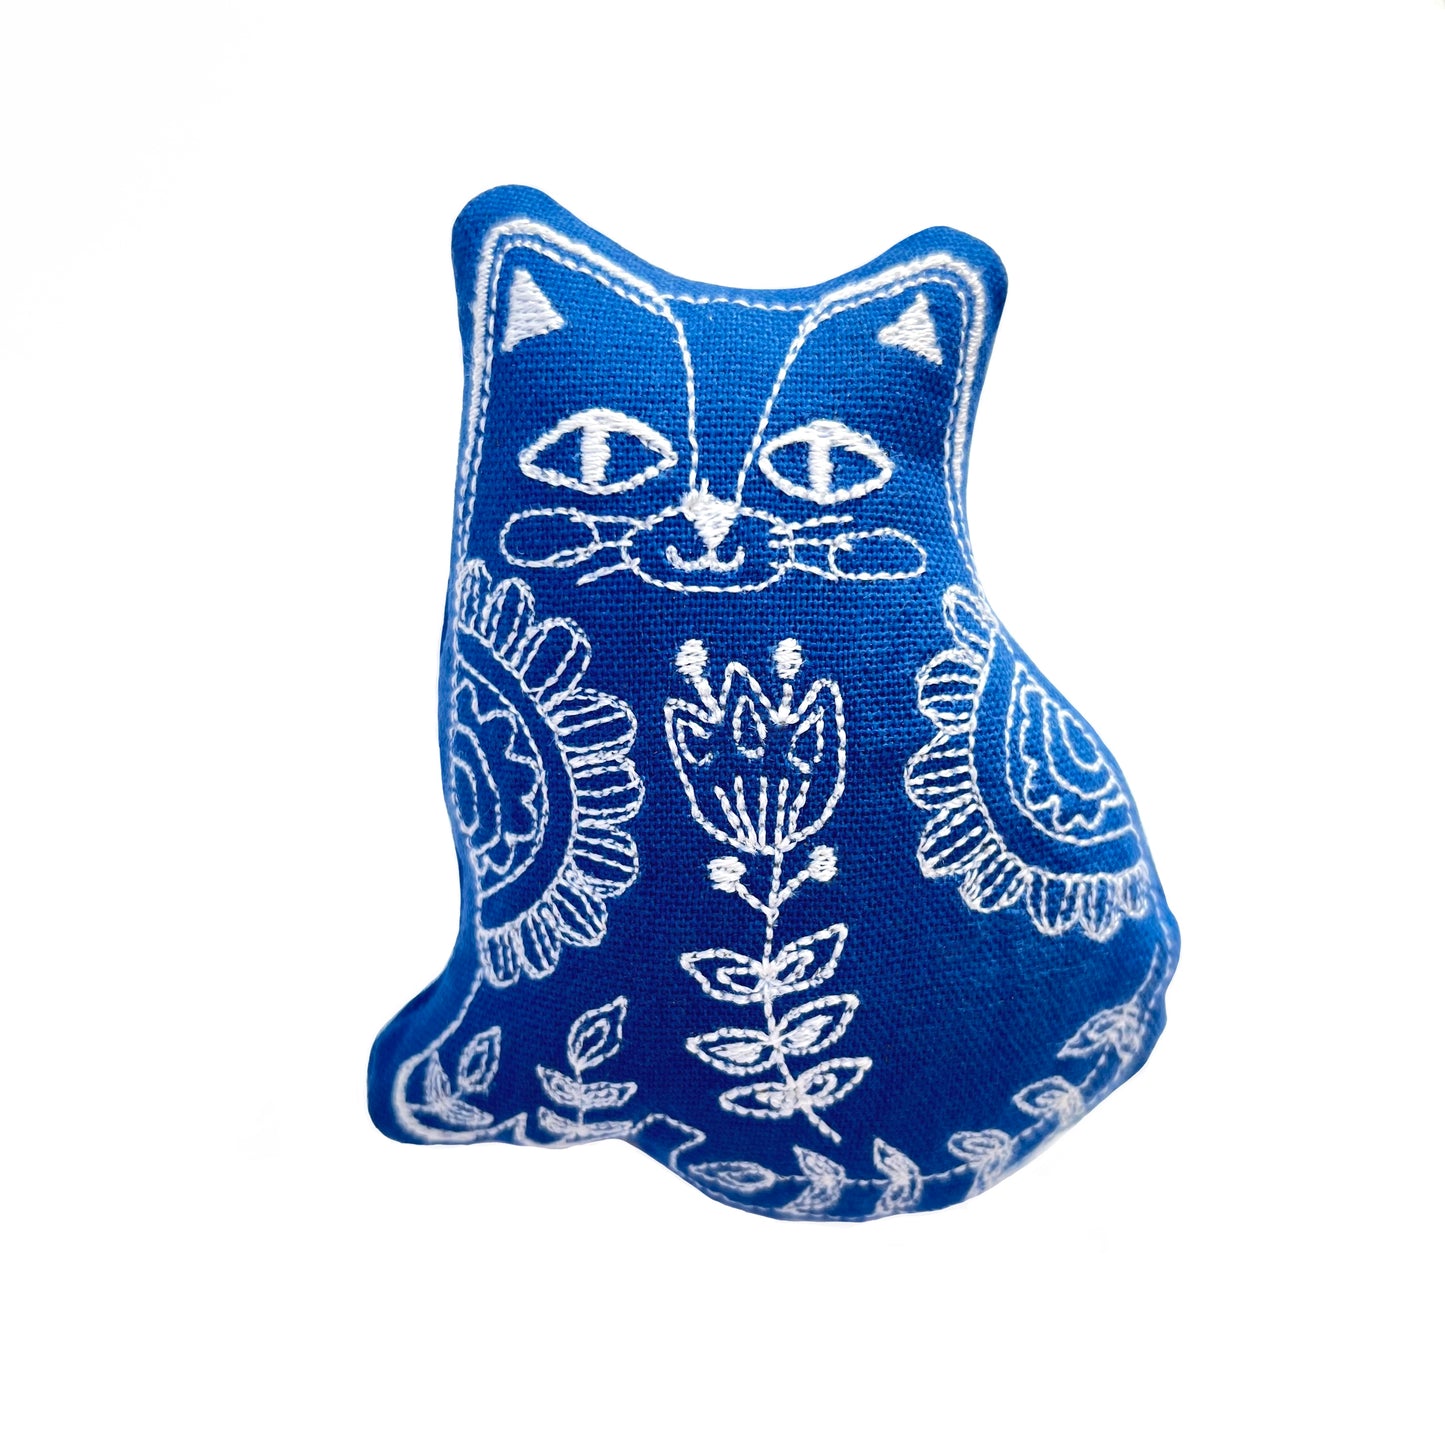 Freak Meowt Luxury Cat Toys, Gifts for Cats Lucile the Cat, Best cat toys handmade in Wales